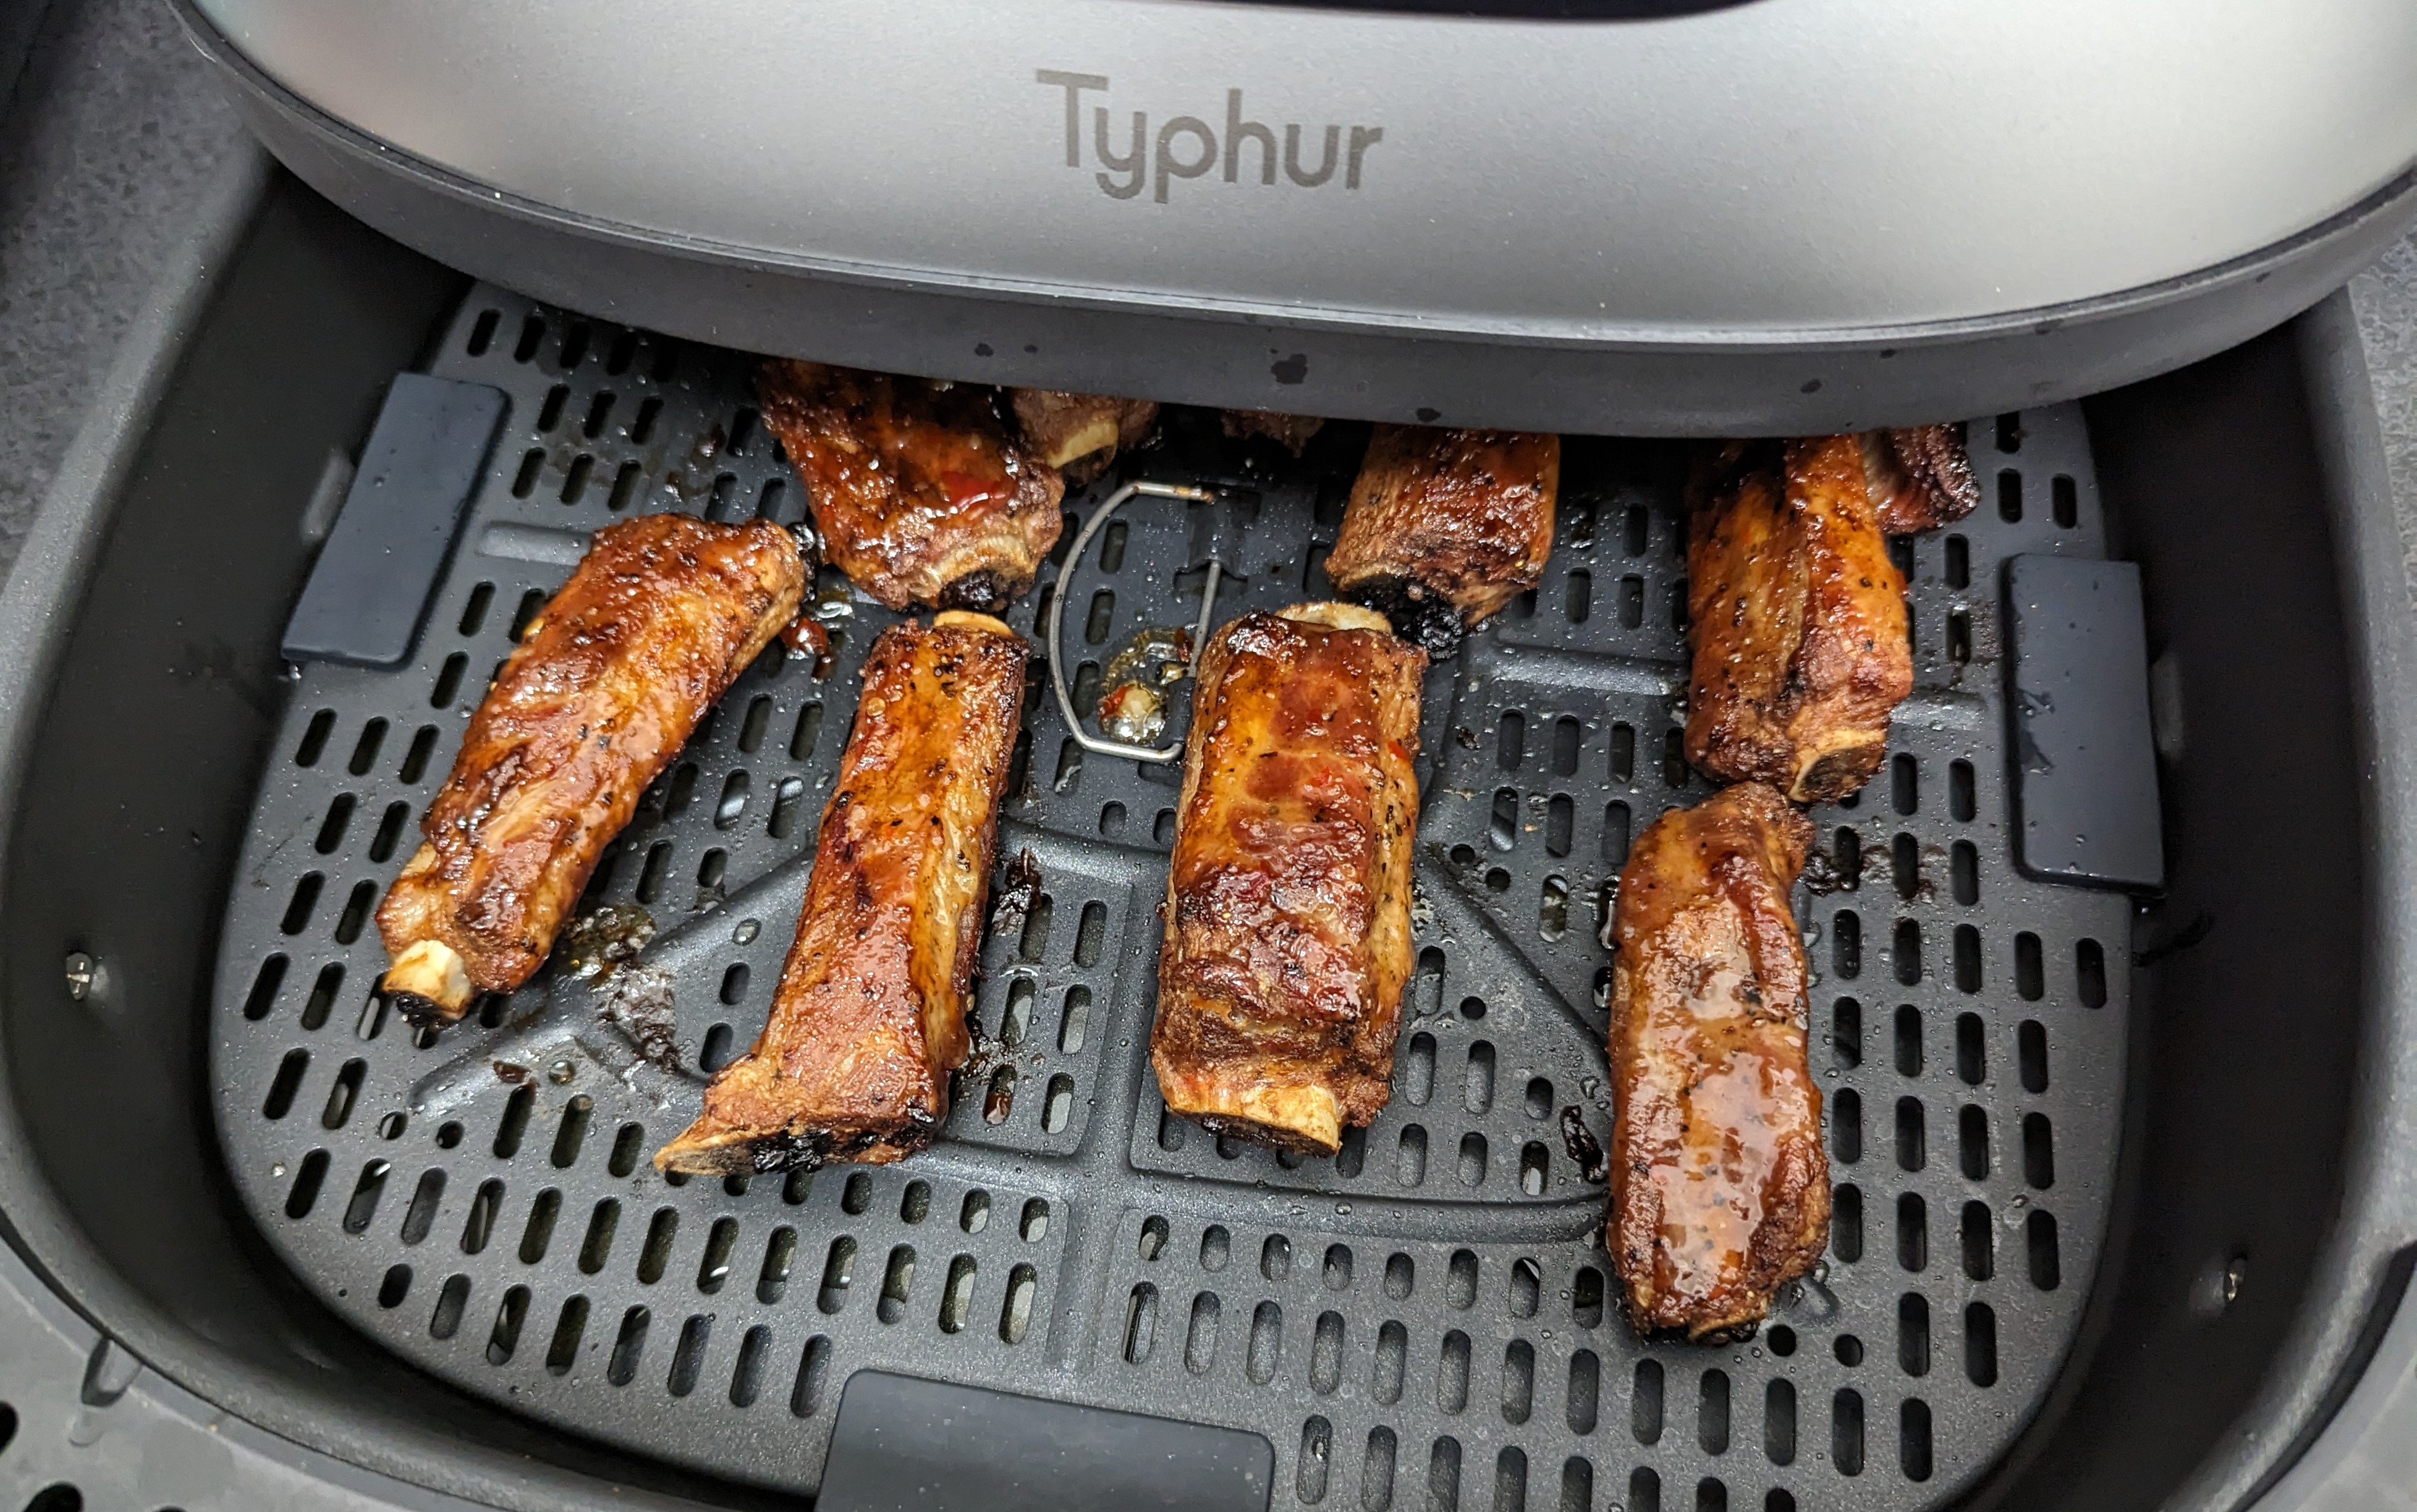 Typhur Dome Large Air Fryer: Cook More, Wait Less